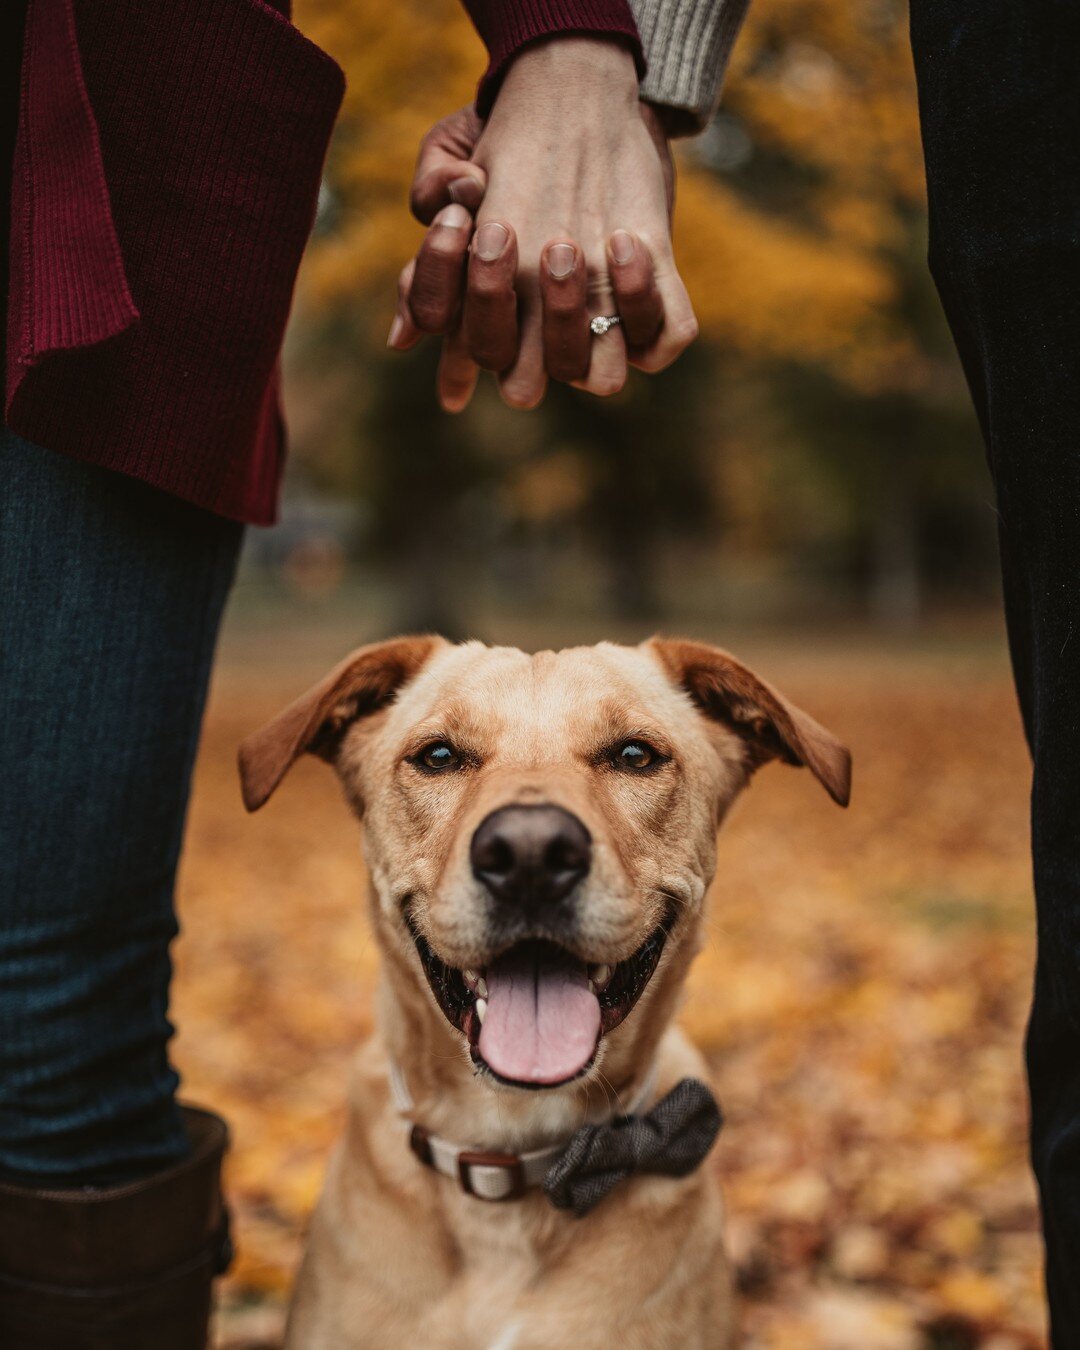 Thinking about including your fur buddy in a photoshoot? Here are some inspirations.

@the_tall_tails @natalya_sur 

#dogportrait #engagementwithdog #engagementshootwithdog #furbaby #furbabylove #engagementsessionwithdog #engagementshootwithdogs #eng